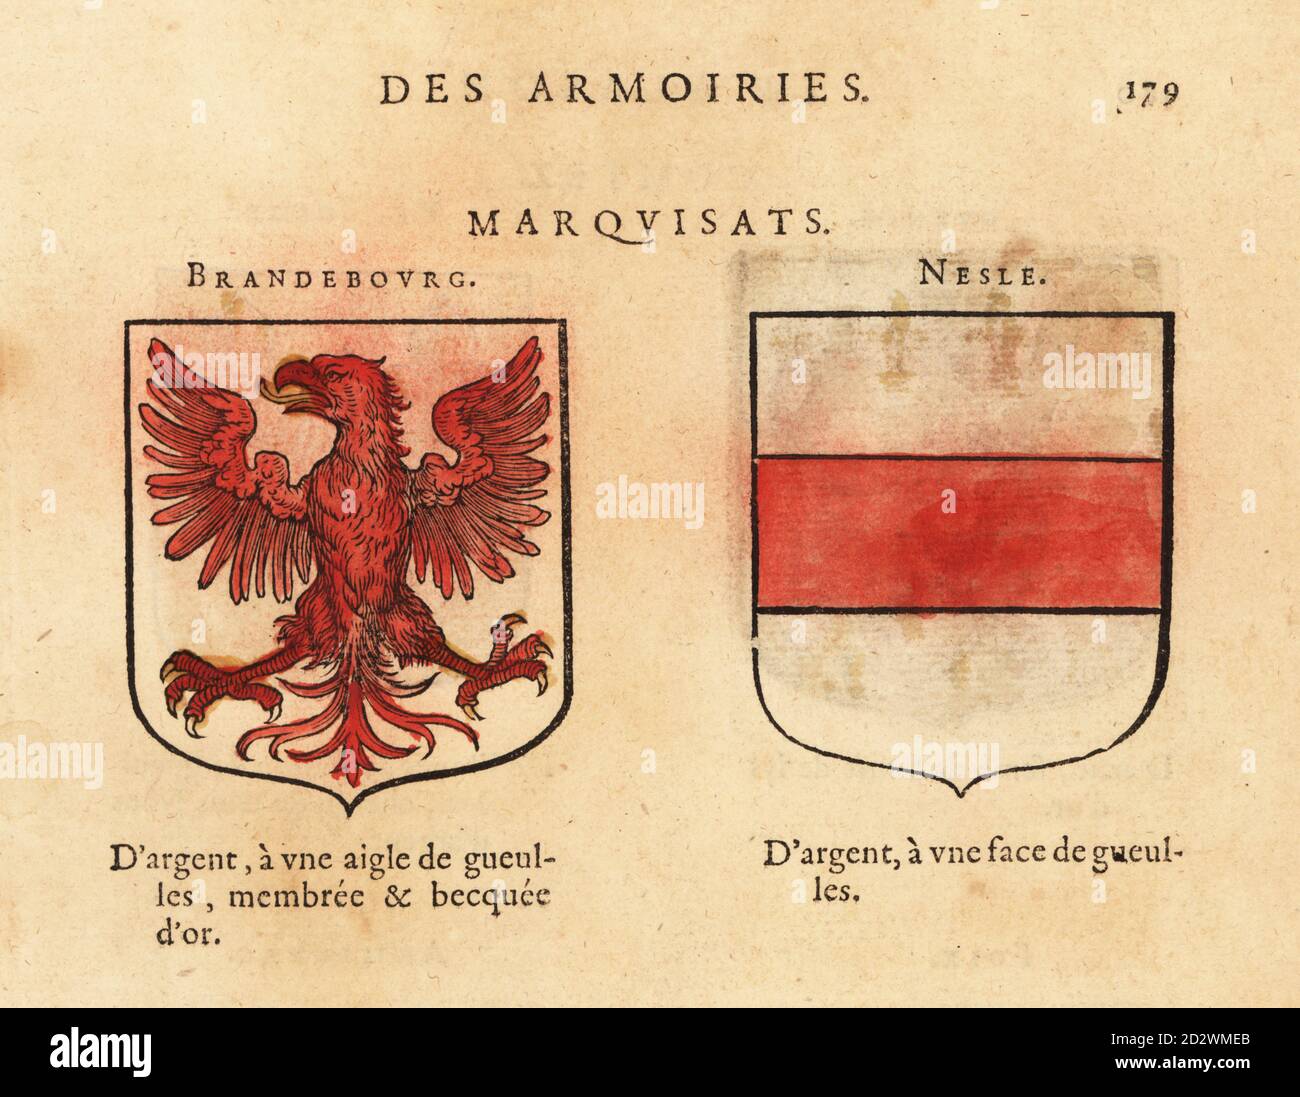 Coat of arms of the Margraviate of Brandenburg,Germany, with red eagle on silver field, and the Margraviate of Nesle, with red fesse on silver field. Marquisats: Brandebourg, Nesle. Handcoloured woodblock engraving from Hierosme de Bara’s Le Blason des Armoiries, Chez Rolet Boutonne, Paris, 1628 Stock Photo